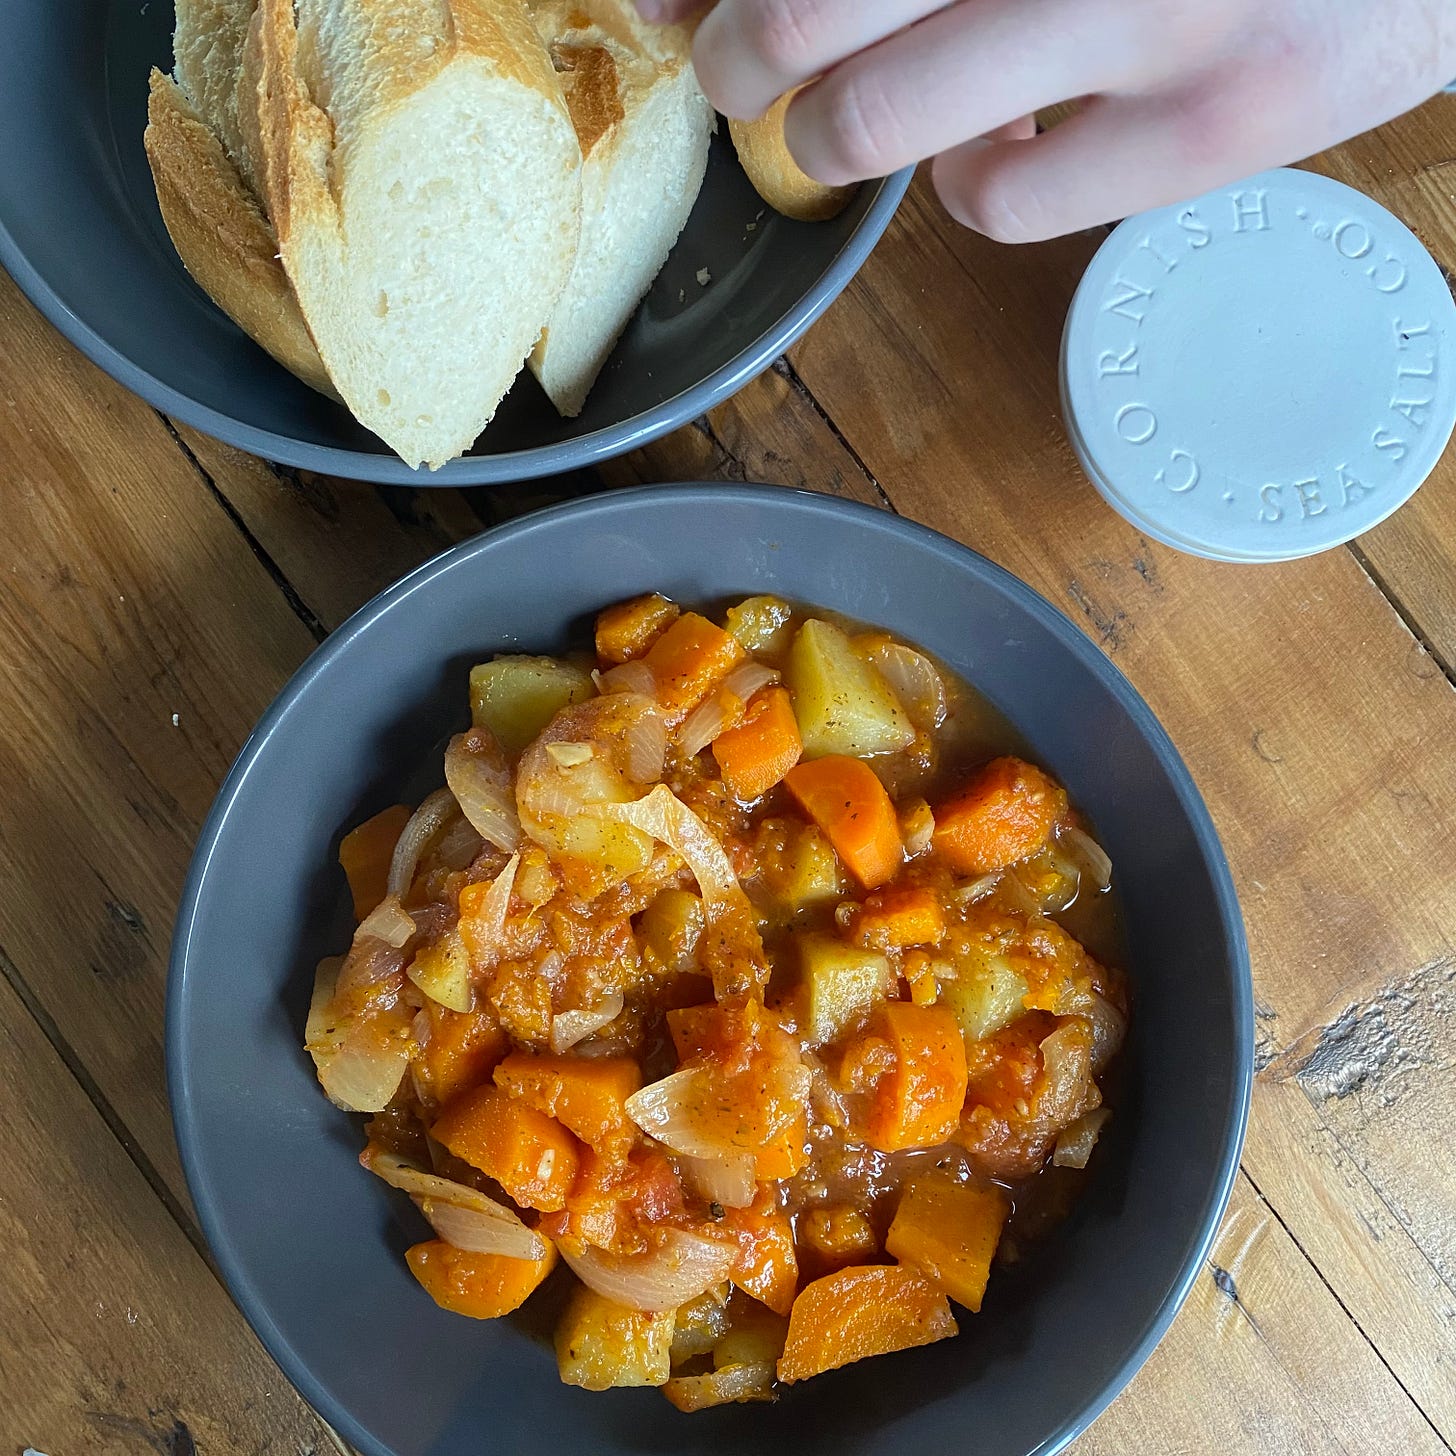 Bowl of spiced vegetable stew in a grey bowl, with a hand reaching for a piece of bread